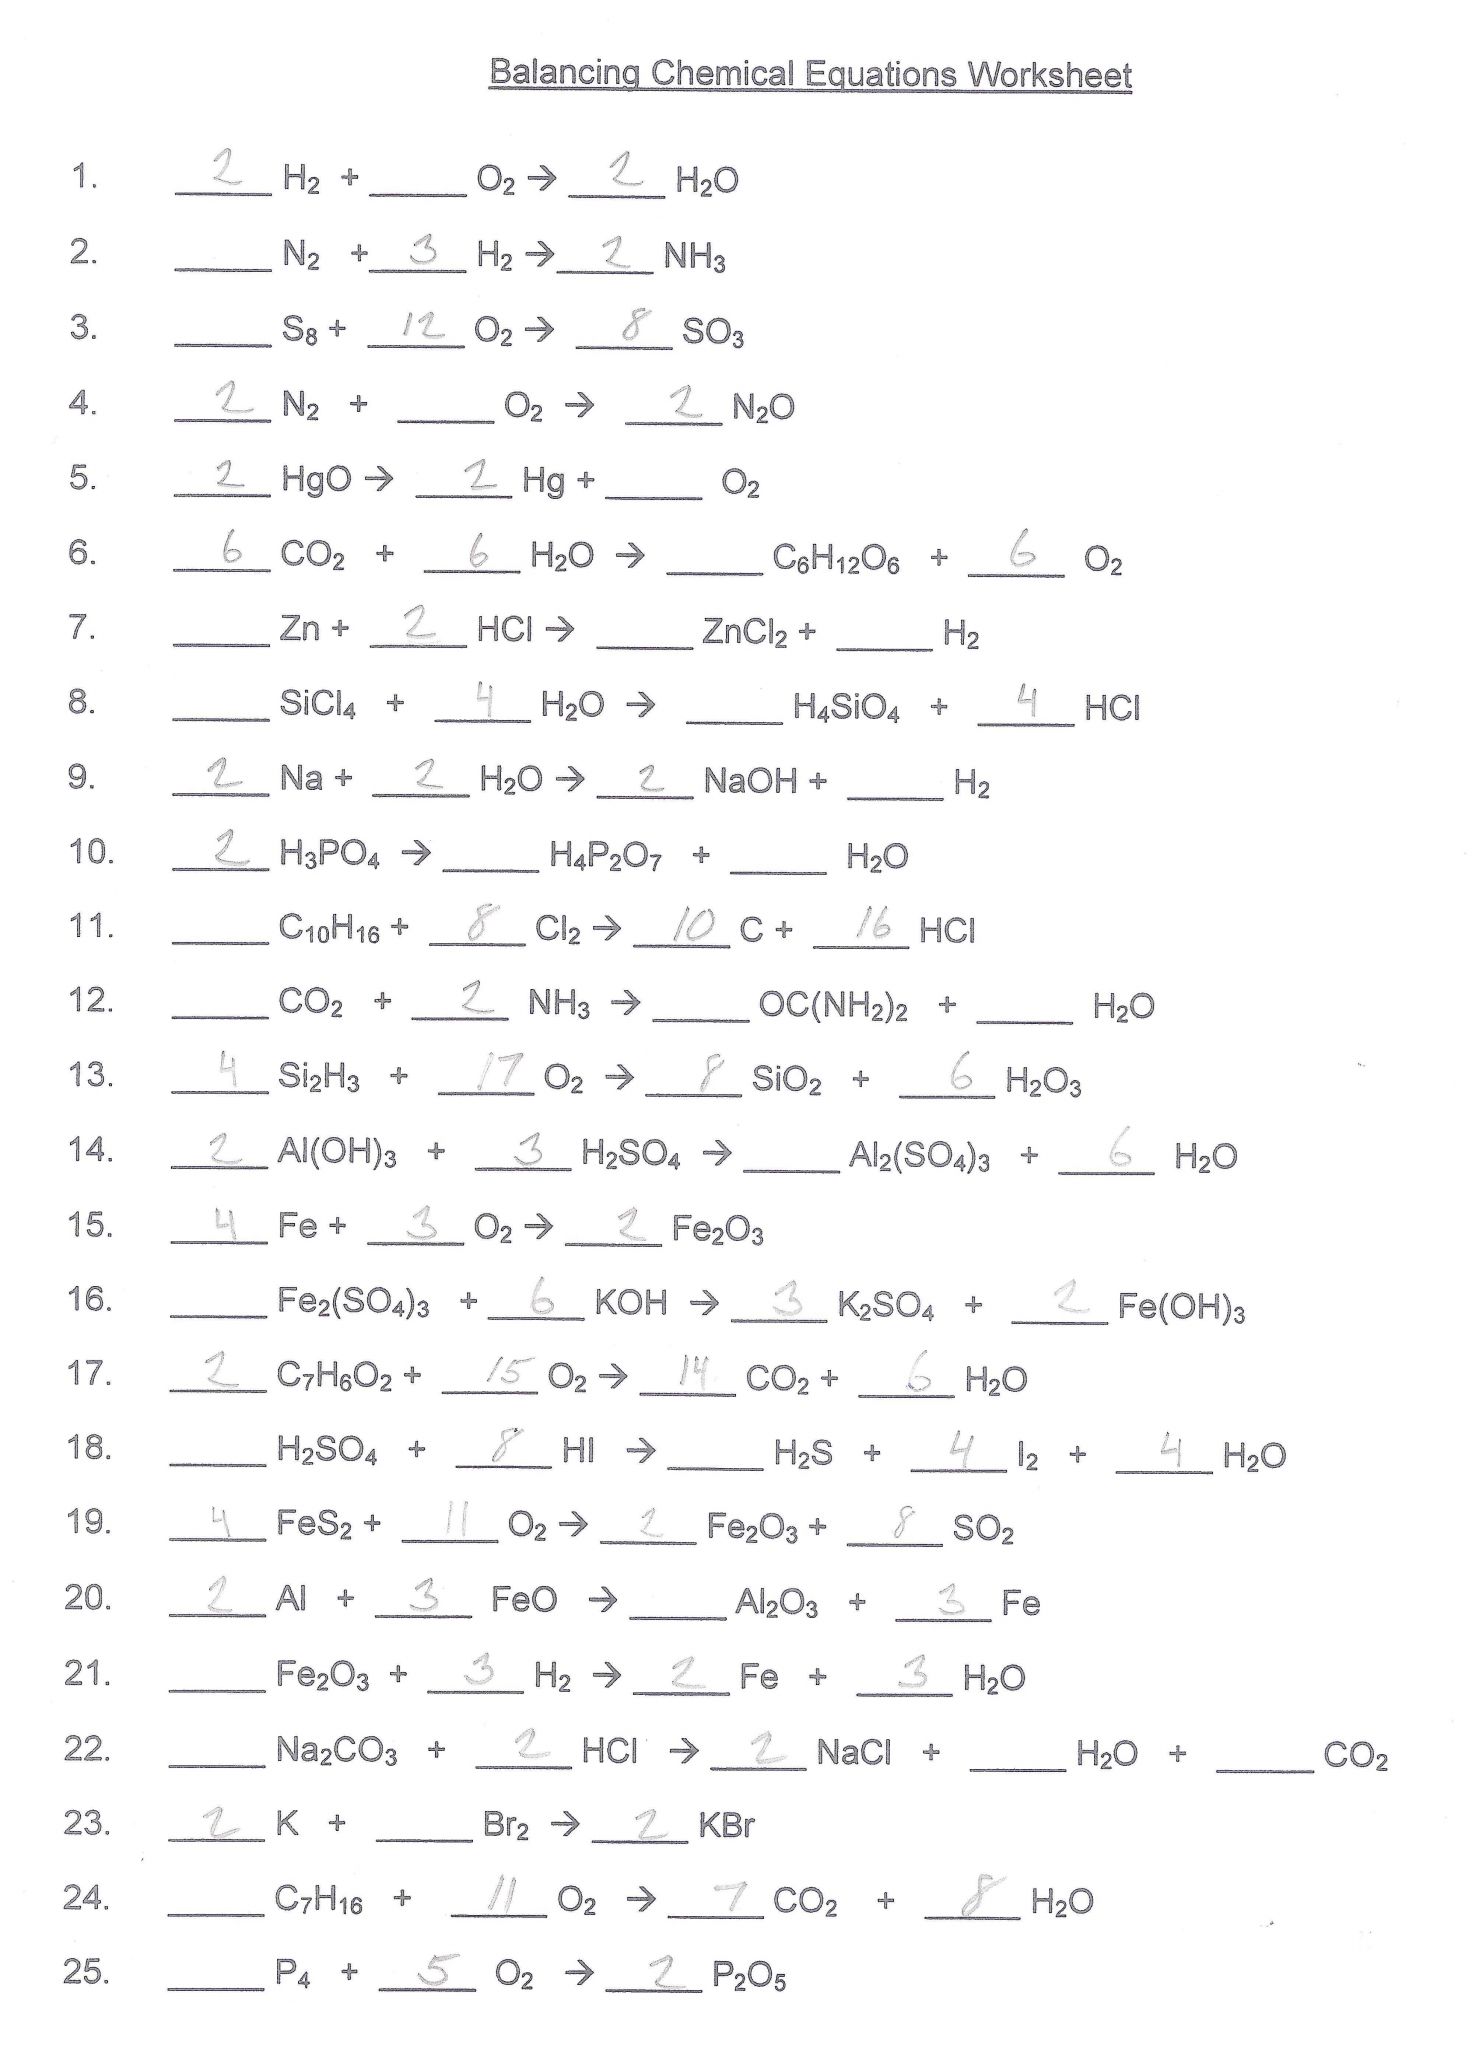 Skills Worksheet Directed Reading A Answer Key Also Balancing Chemical Equations Worksheet Answer Key